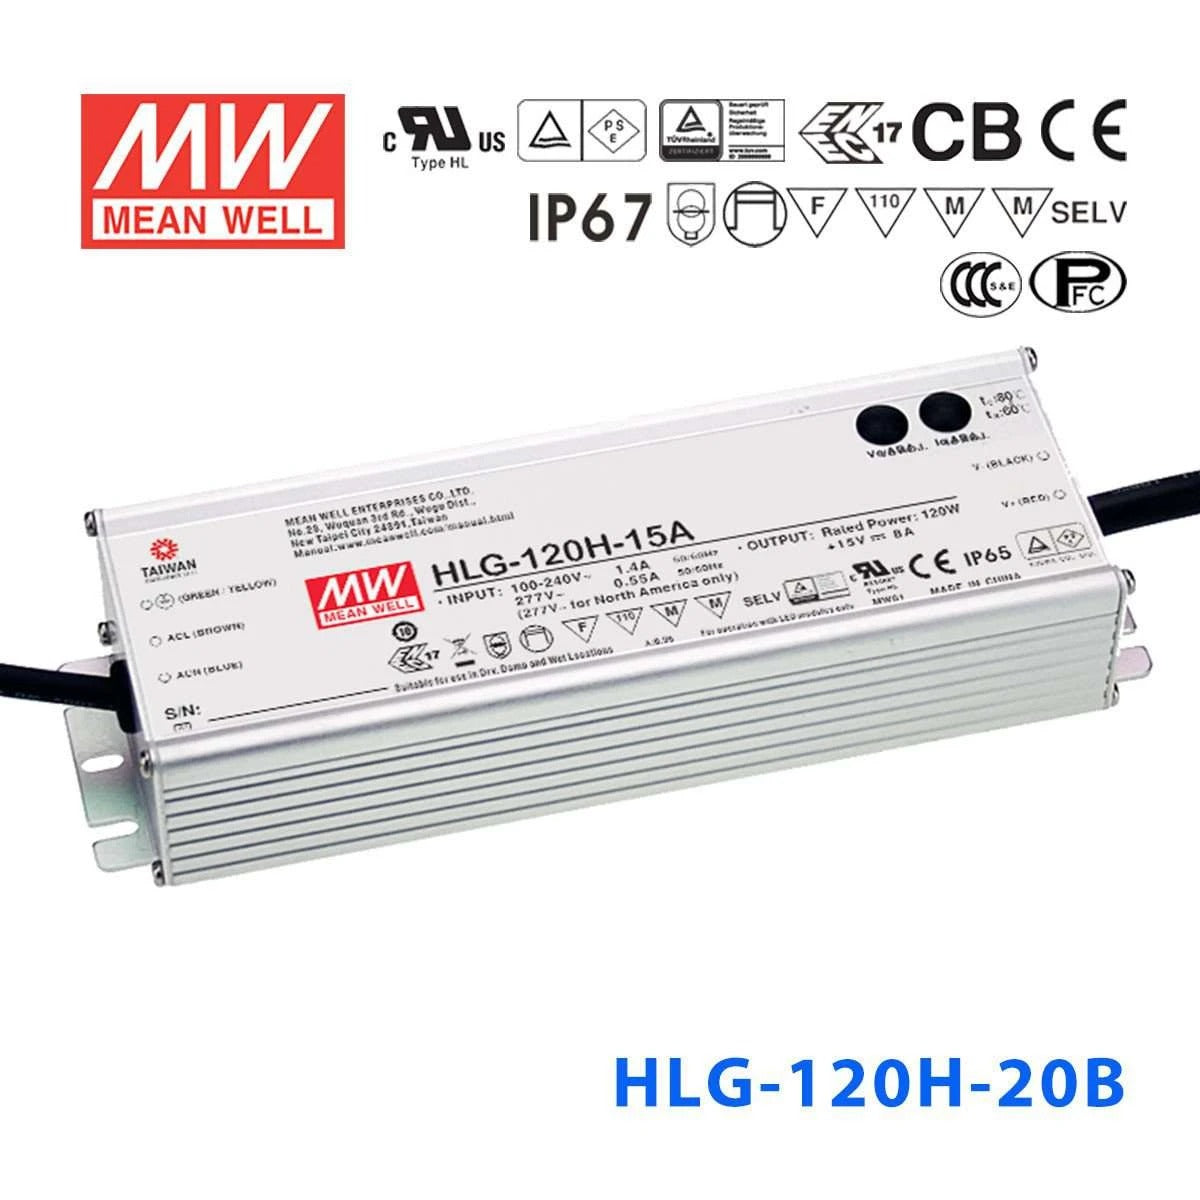 Mean Well HLG-120H-20B Power Supply 120W 20V- Dimmable